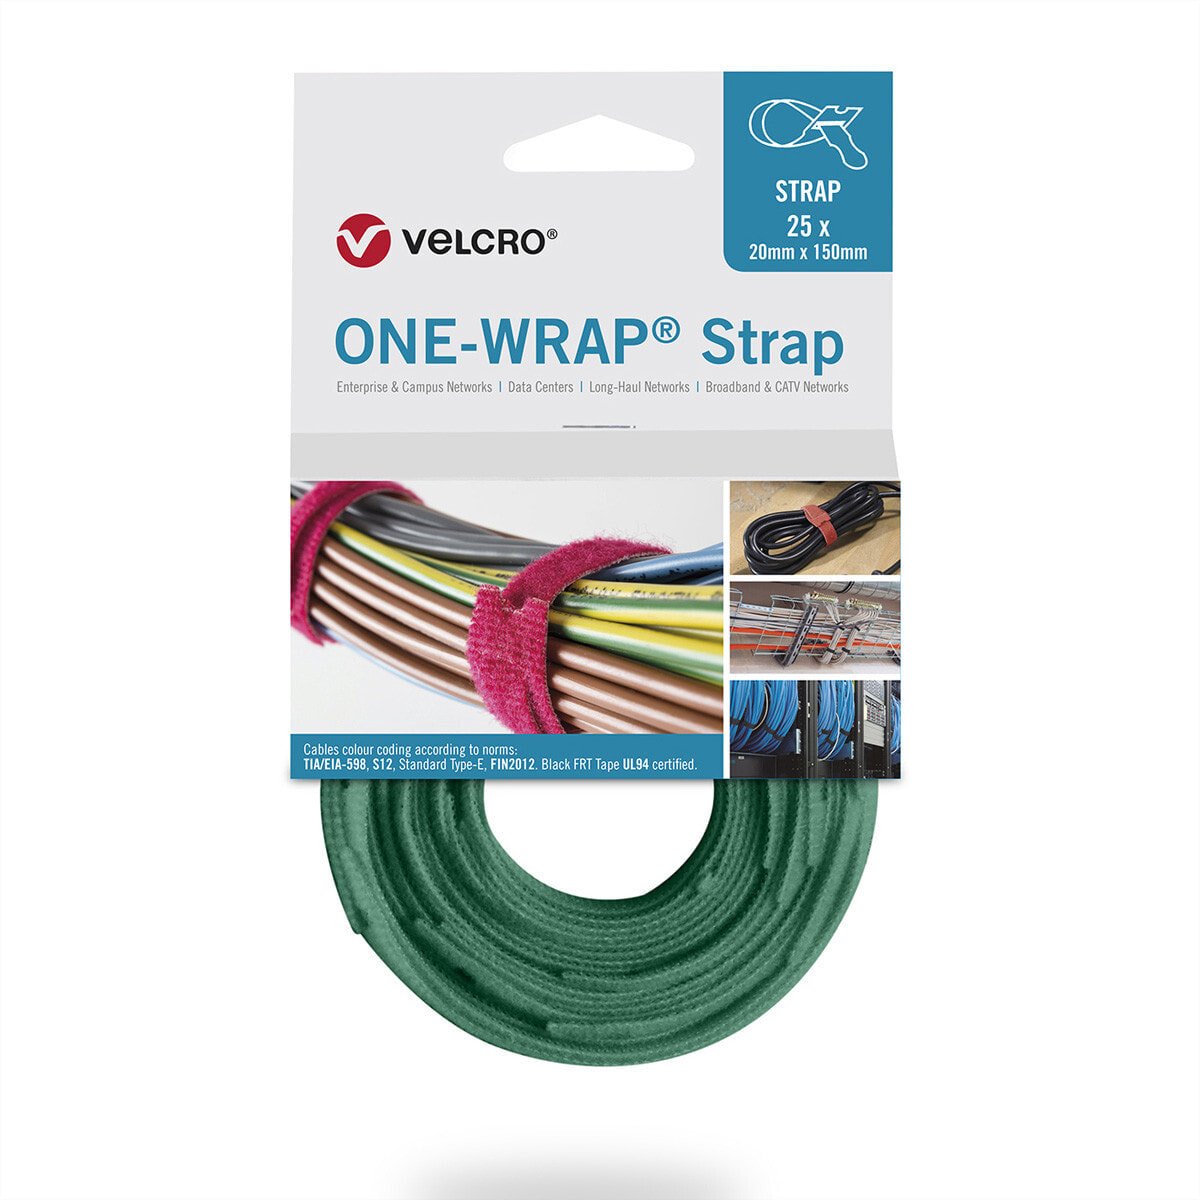 VELCRO ONE-WRAP - Releasable cable tie - Polypropylene (PP) - Velcro - Green - 300 mm - 25 mm - 25 pc(s)